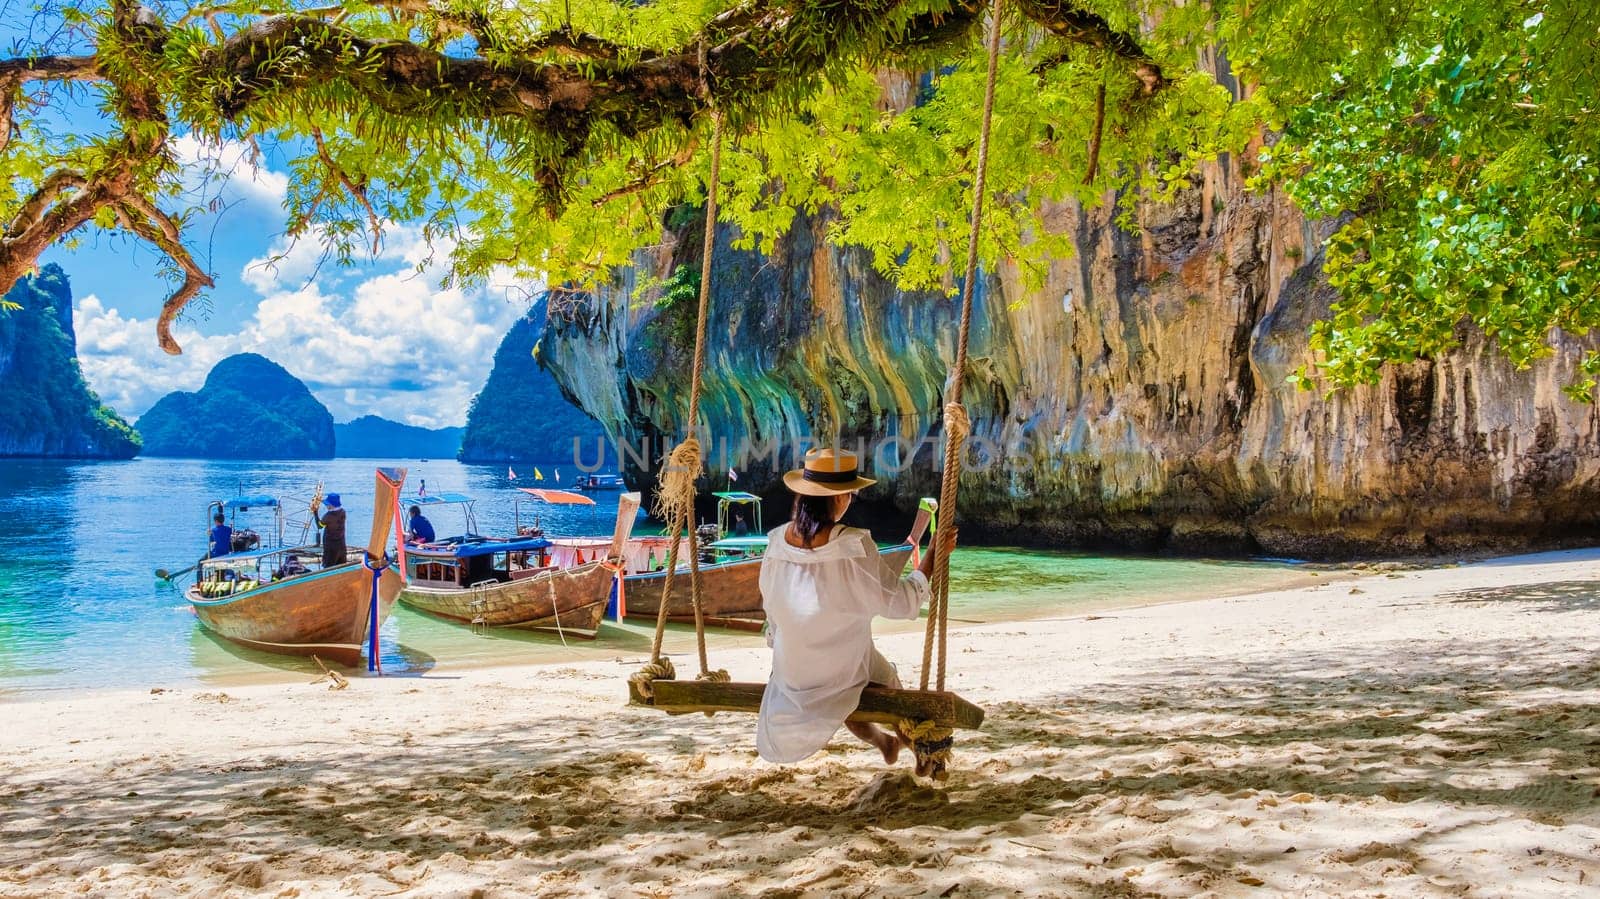 women on a swing at the Tropical lagoon of Koh Loa Lading Krabi Thailand part of Koh Hong Islands by fokkebok